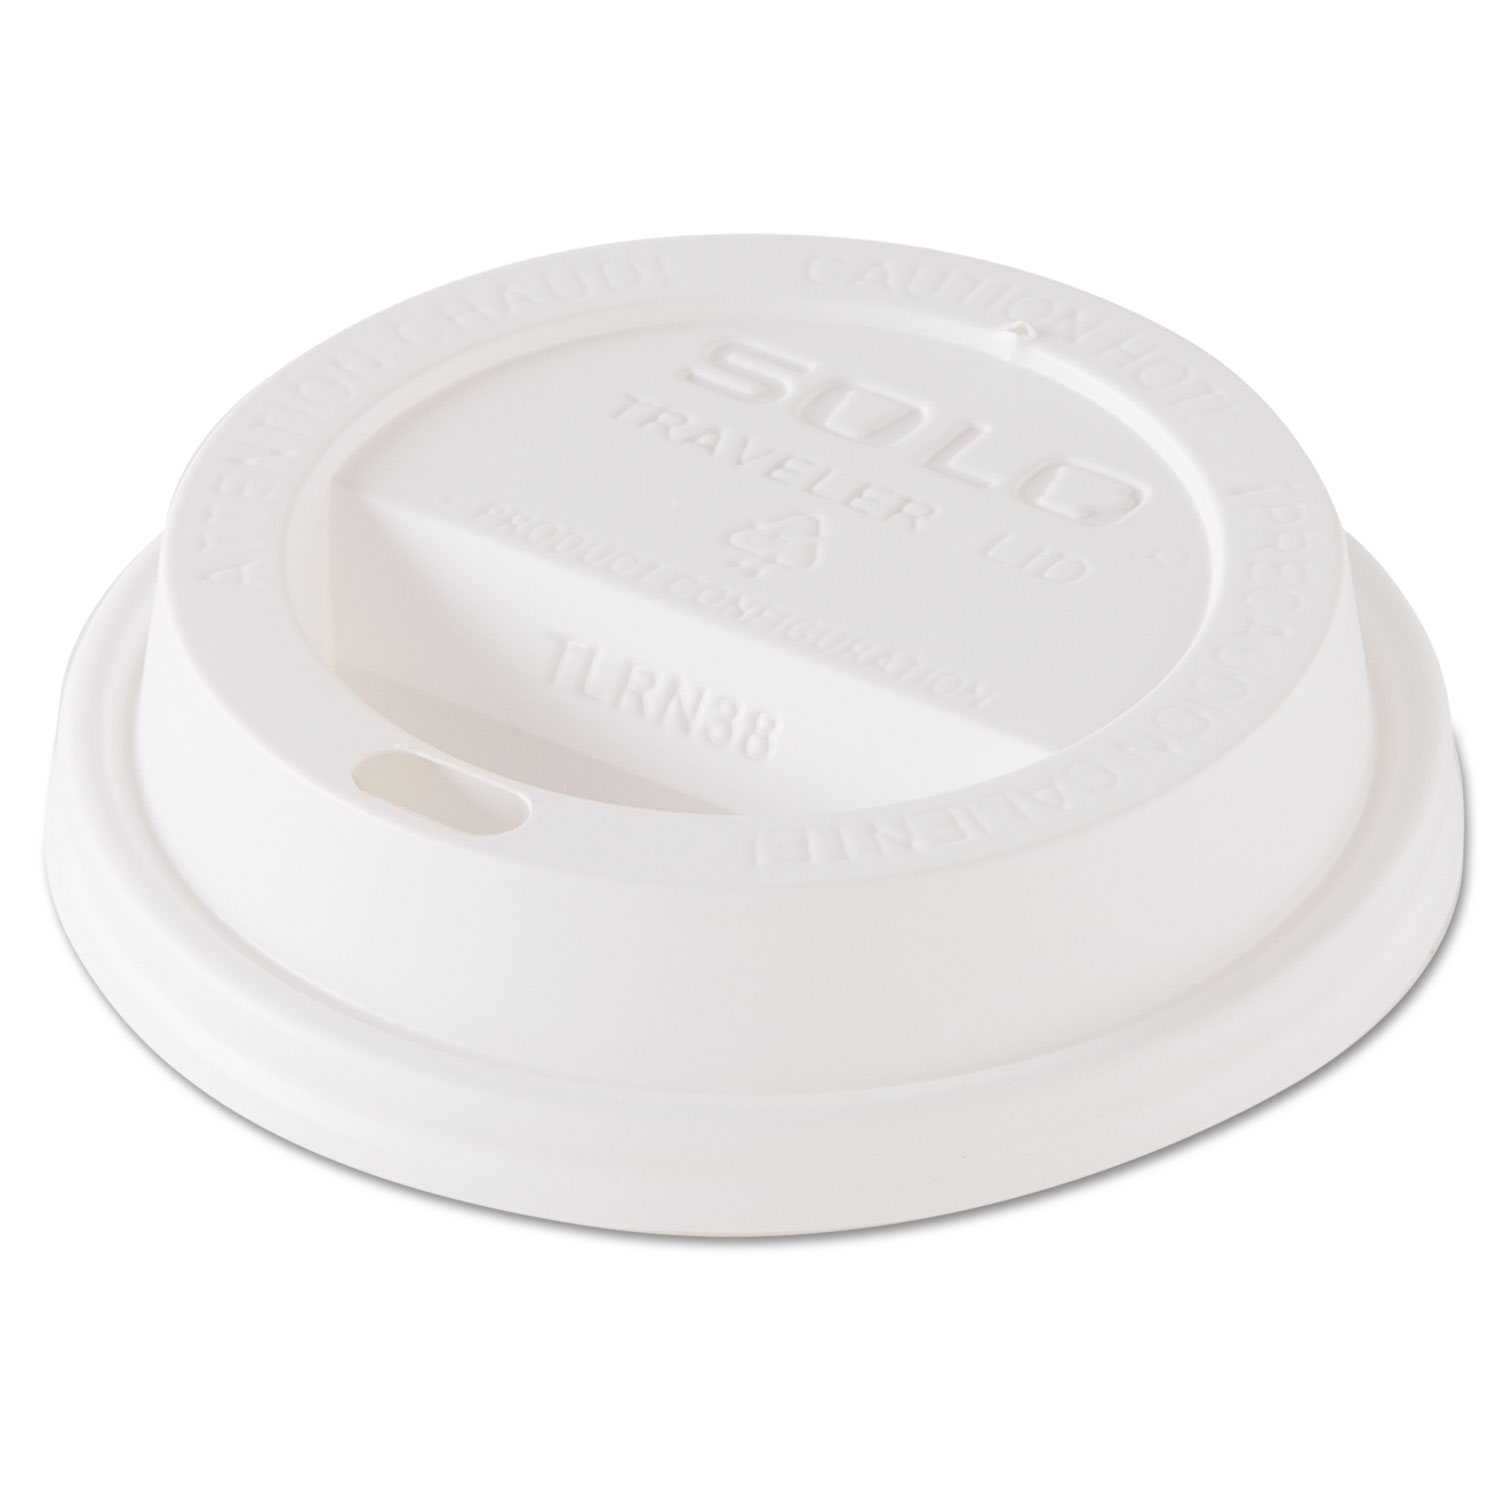  Dart TL38R2-0007 Traveler Dome Hot Cup Lid, Fits 8oz Cups, White, 100/Pack, 10 Packs/Carton (SCCTL38R2) 